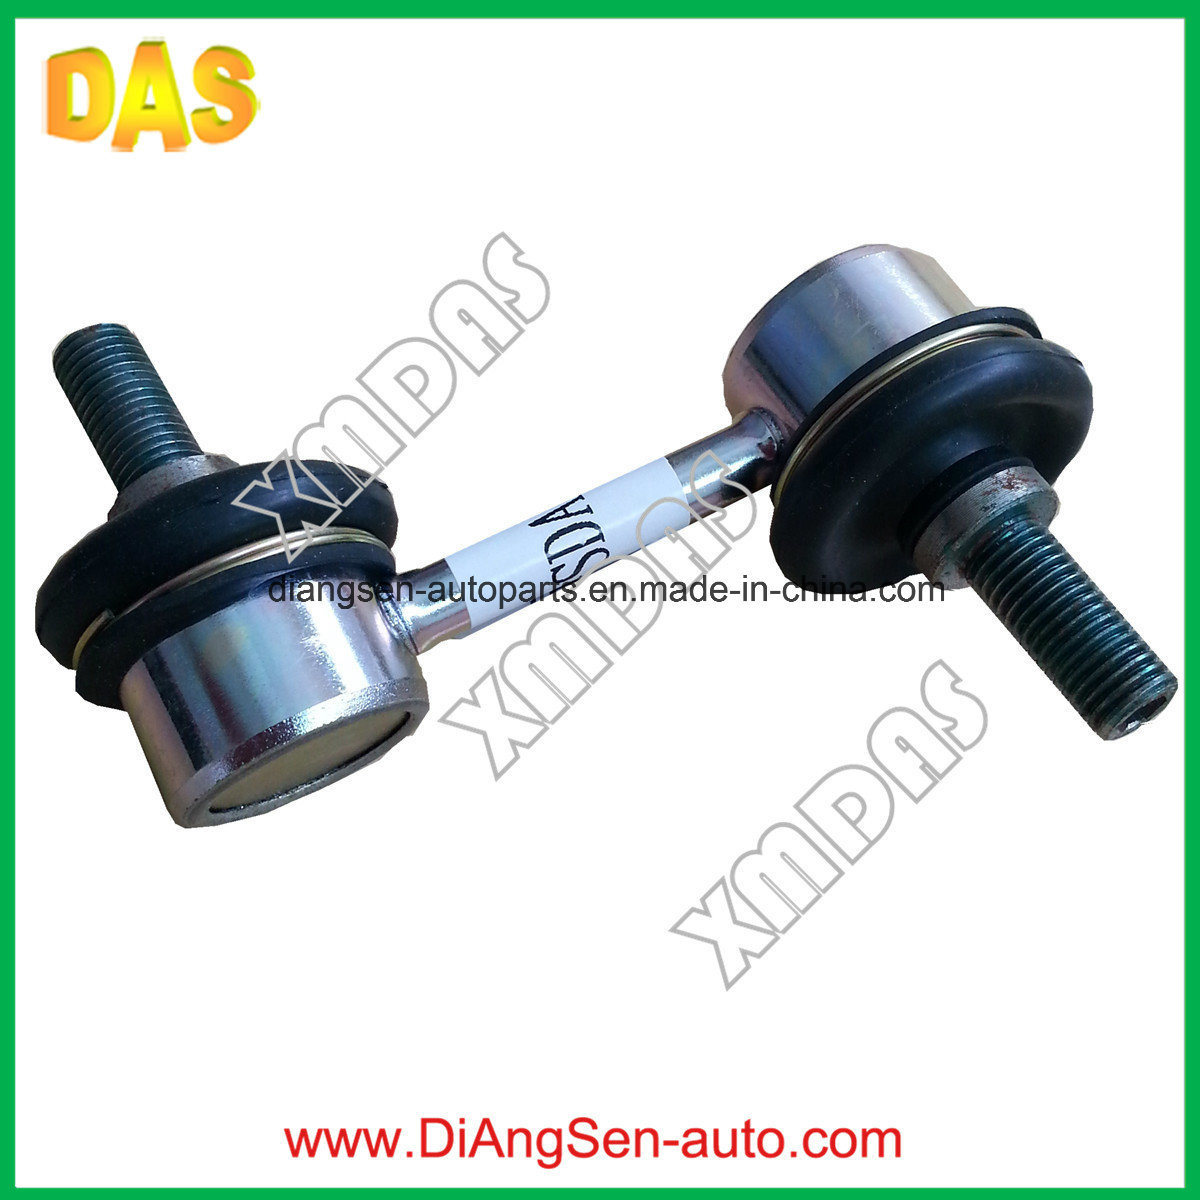 Automotive Parts Sway Bar Stabilizer Link for Japanese Car (51320-SDA-A05)